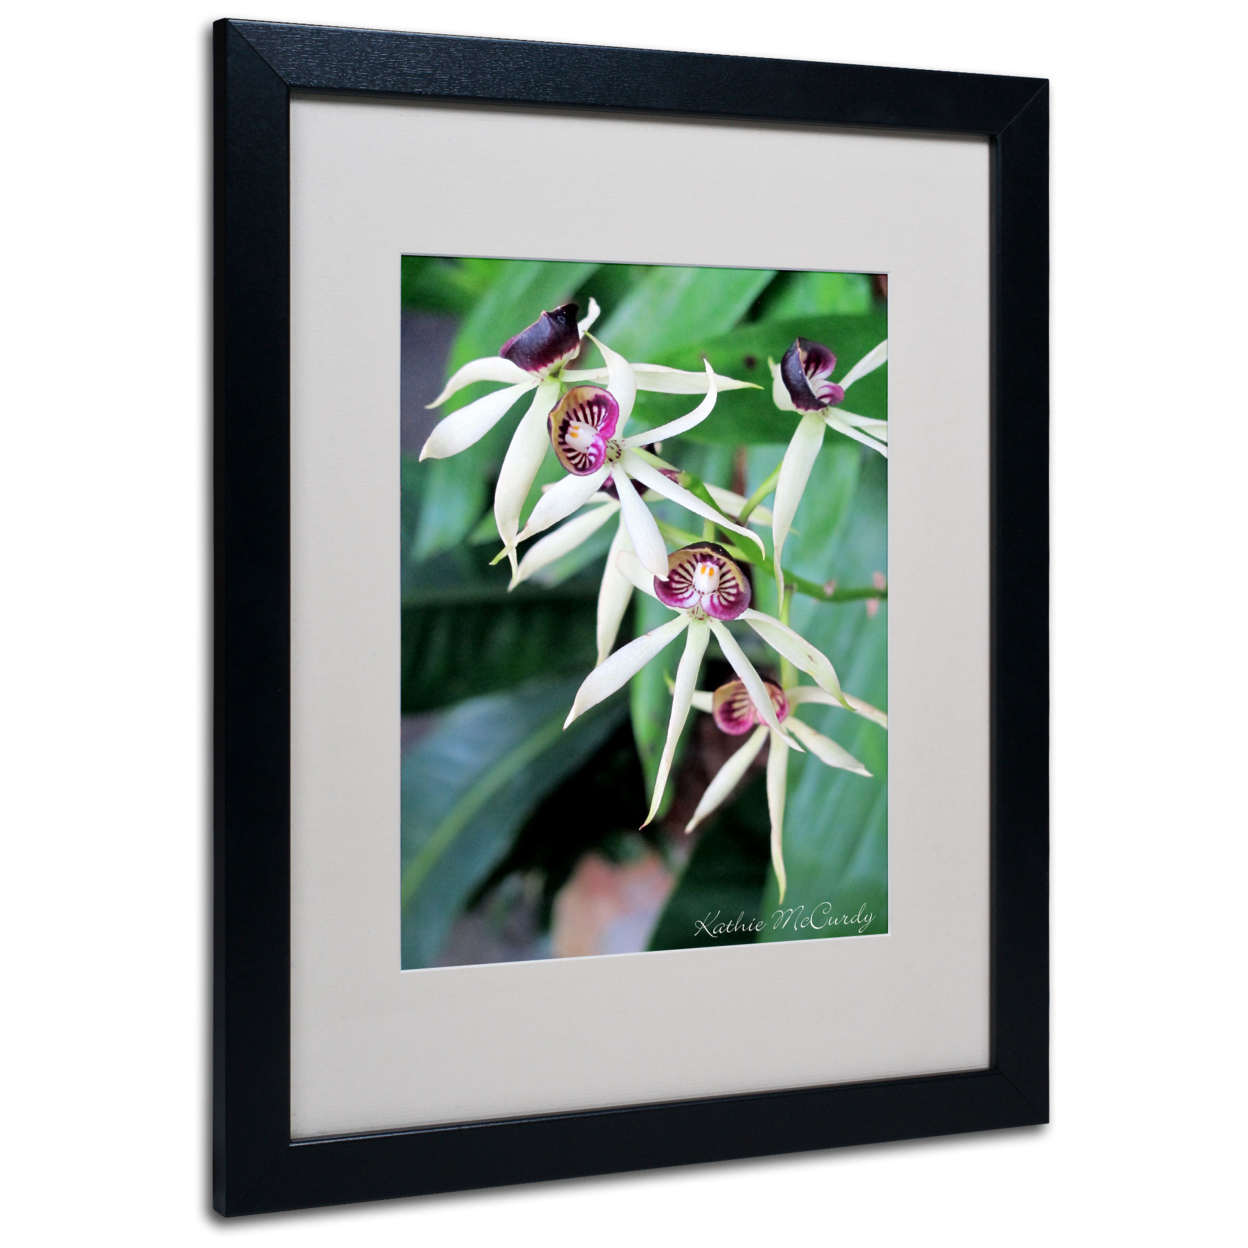 Kathie McCurdy 'Orchids II' Black Wooden Framed Art 18 X 22 Inches